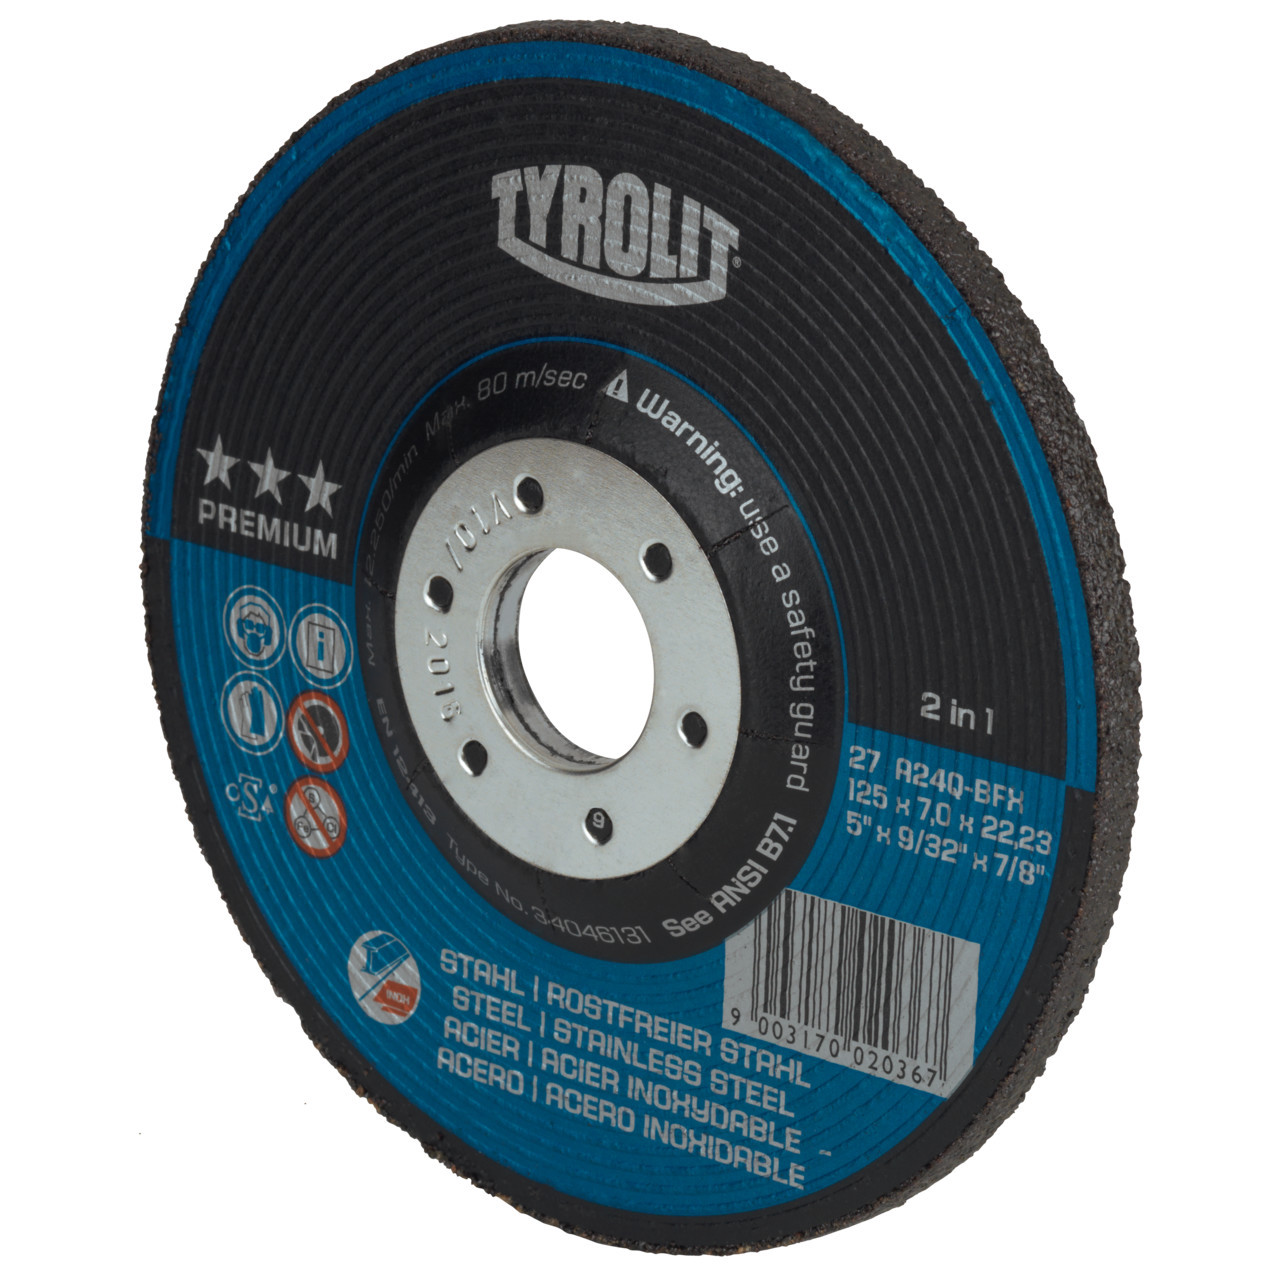 TYROLIT grinding wheel DxUxH 230x4x22.23 2in1 for steel and stainless steel, shape: 27 - offset version, Art. 5406